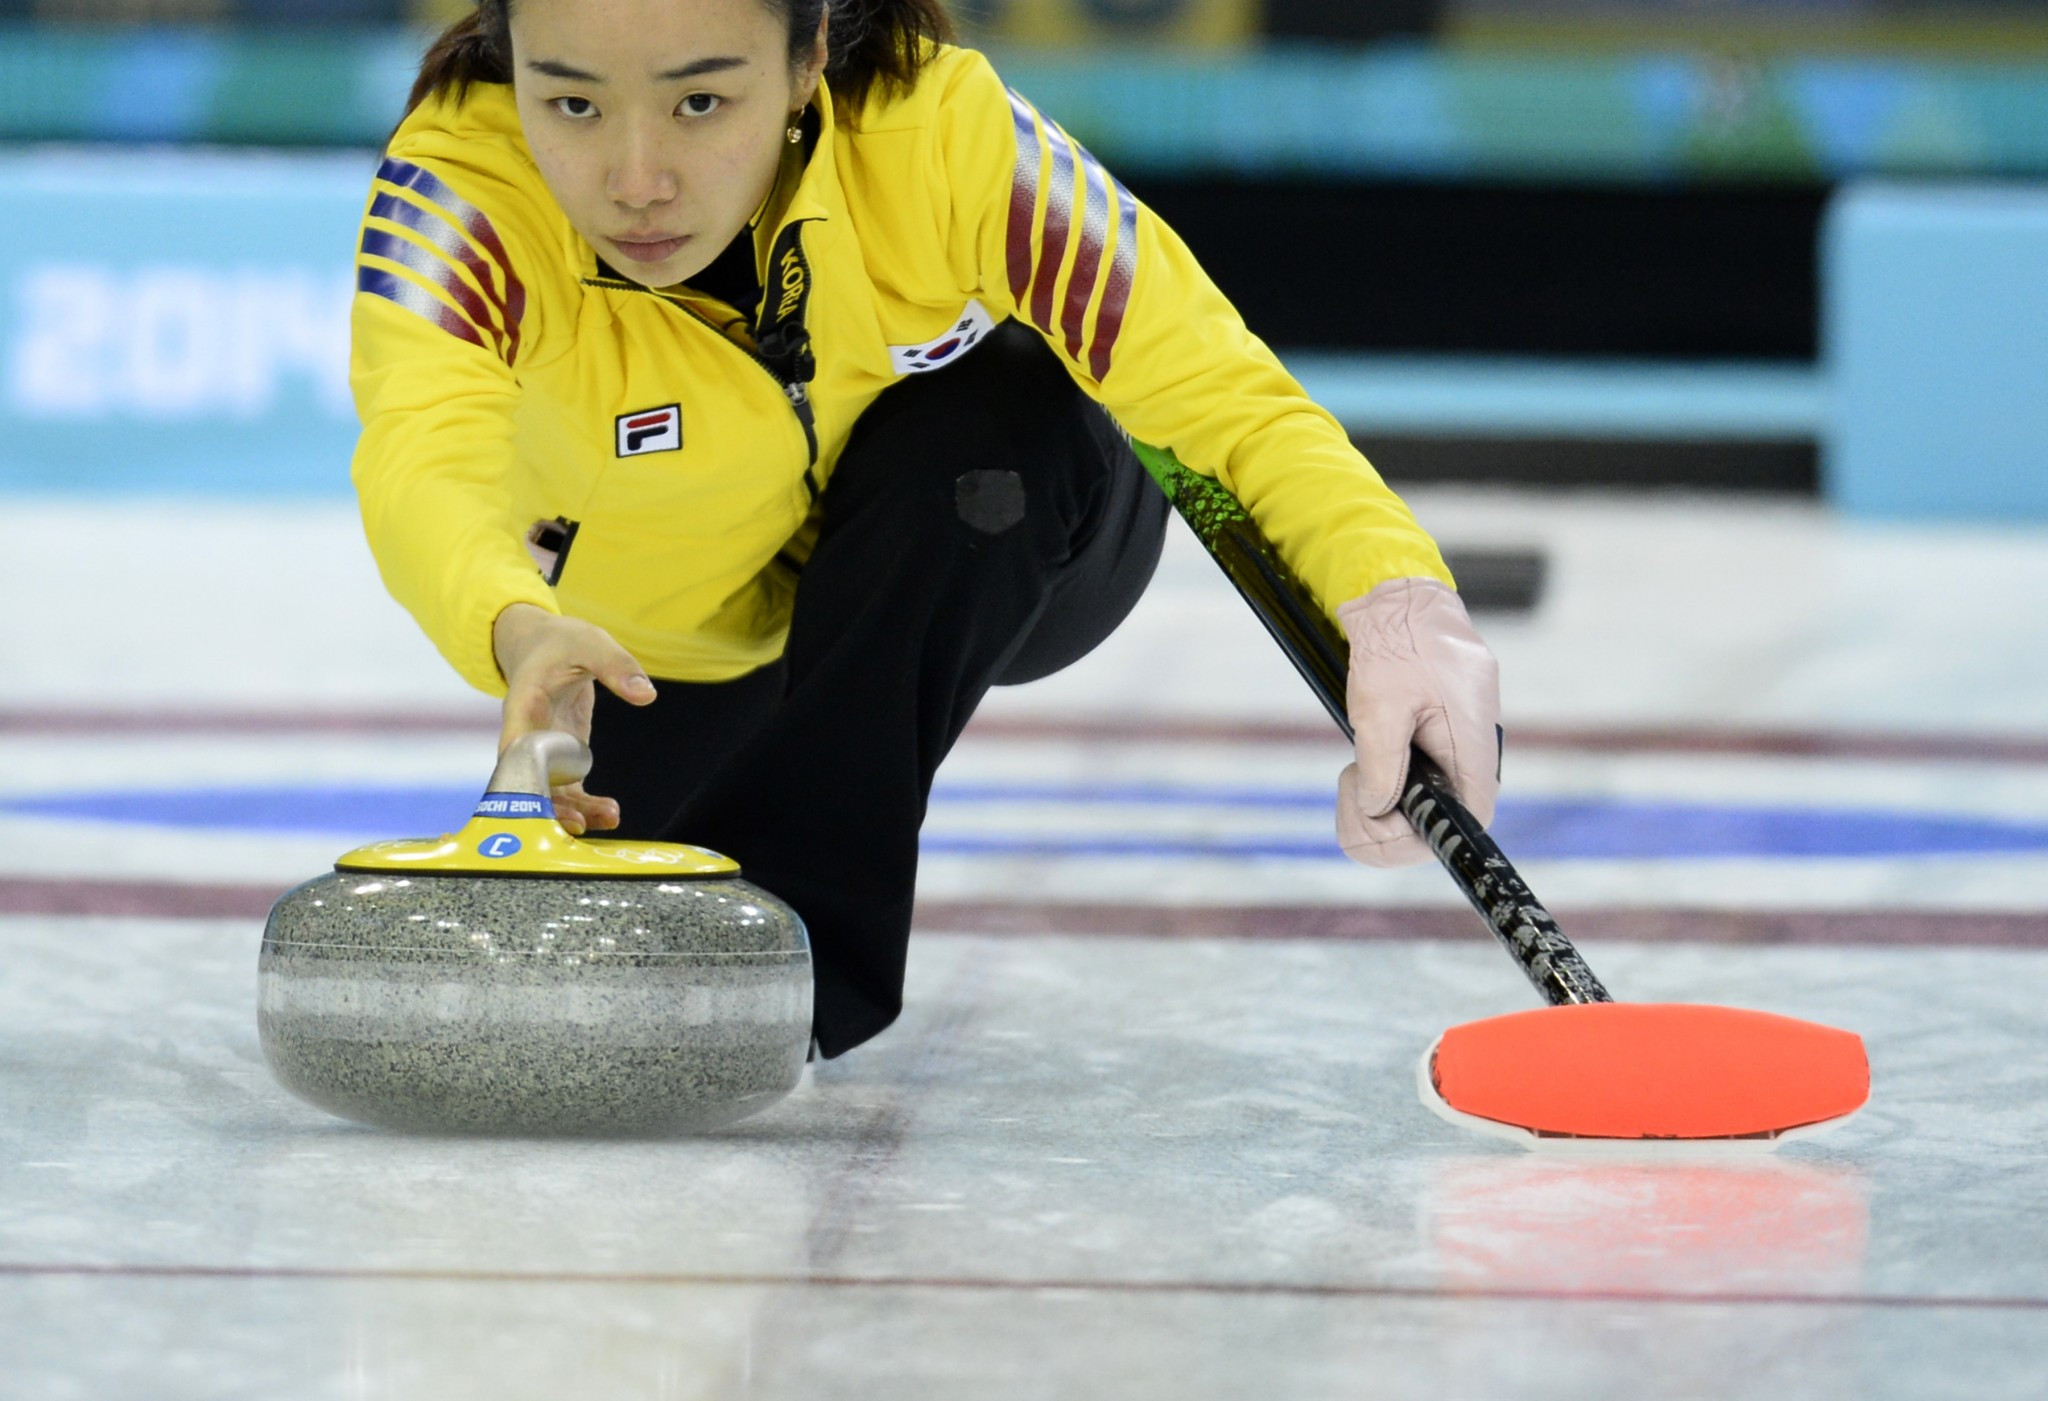 South Korean curlers aim for medals at Pyeongchang 2018